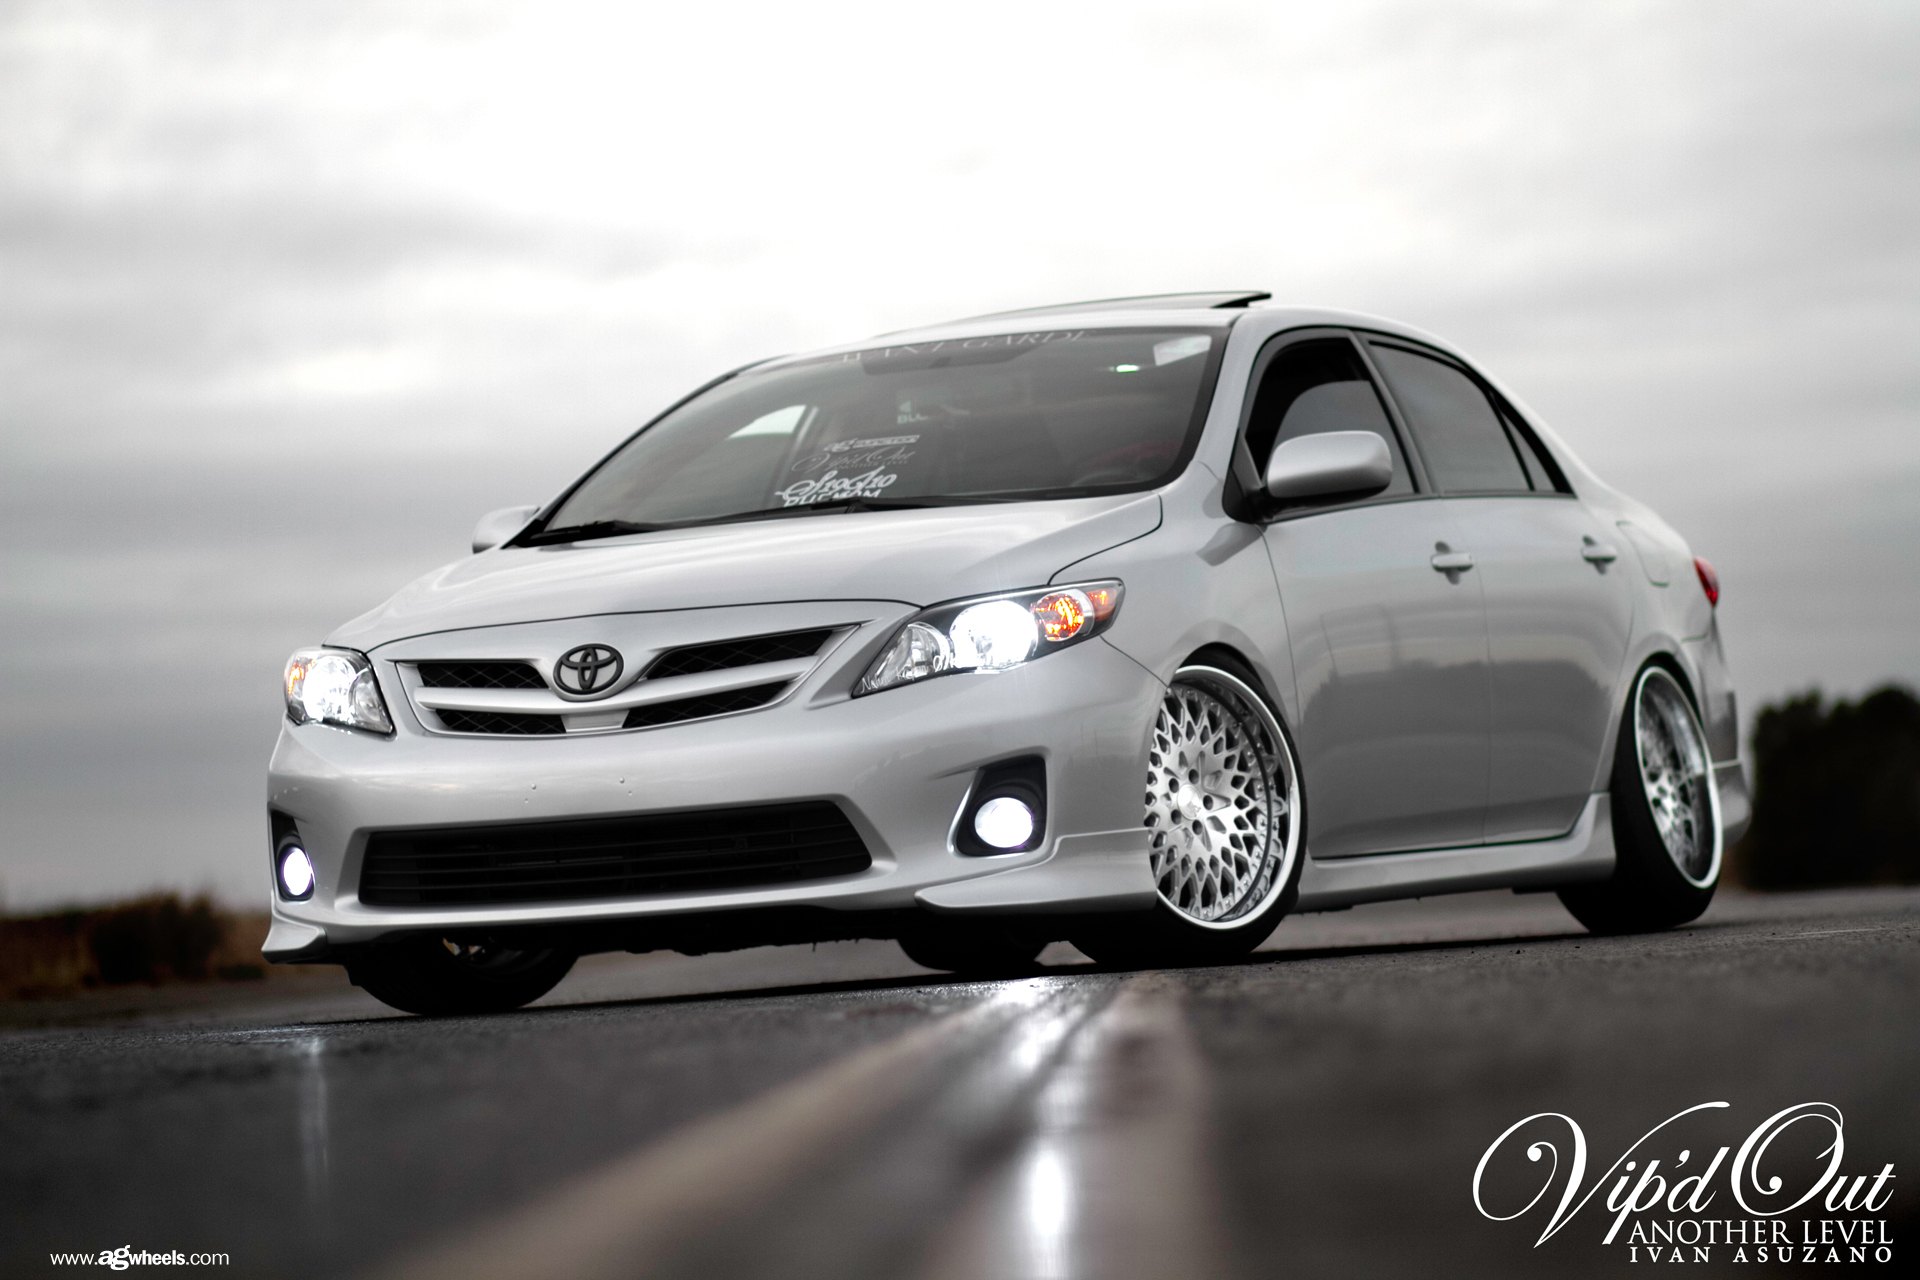 Blacked Out Grille on Gray Toyota Corolla - Photo by Avant Garde Wheels